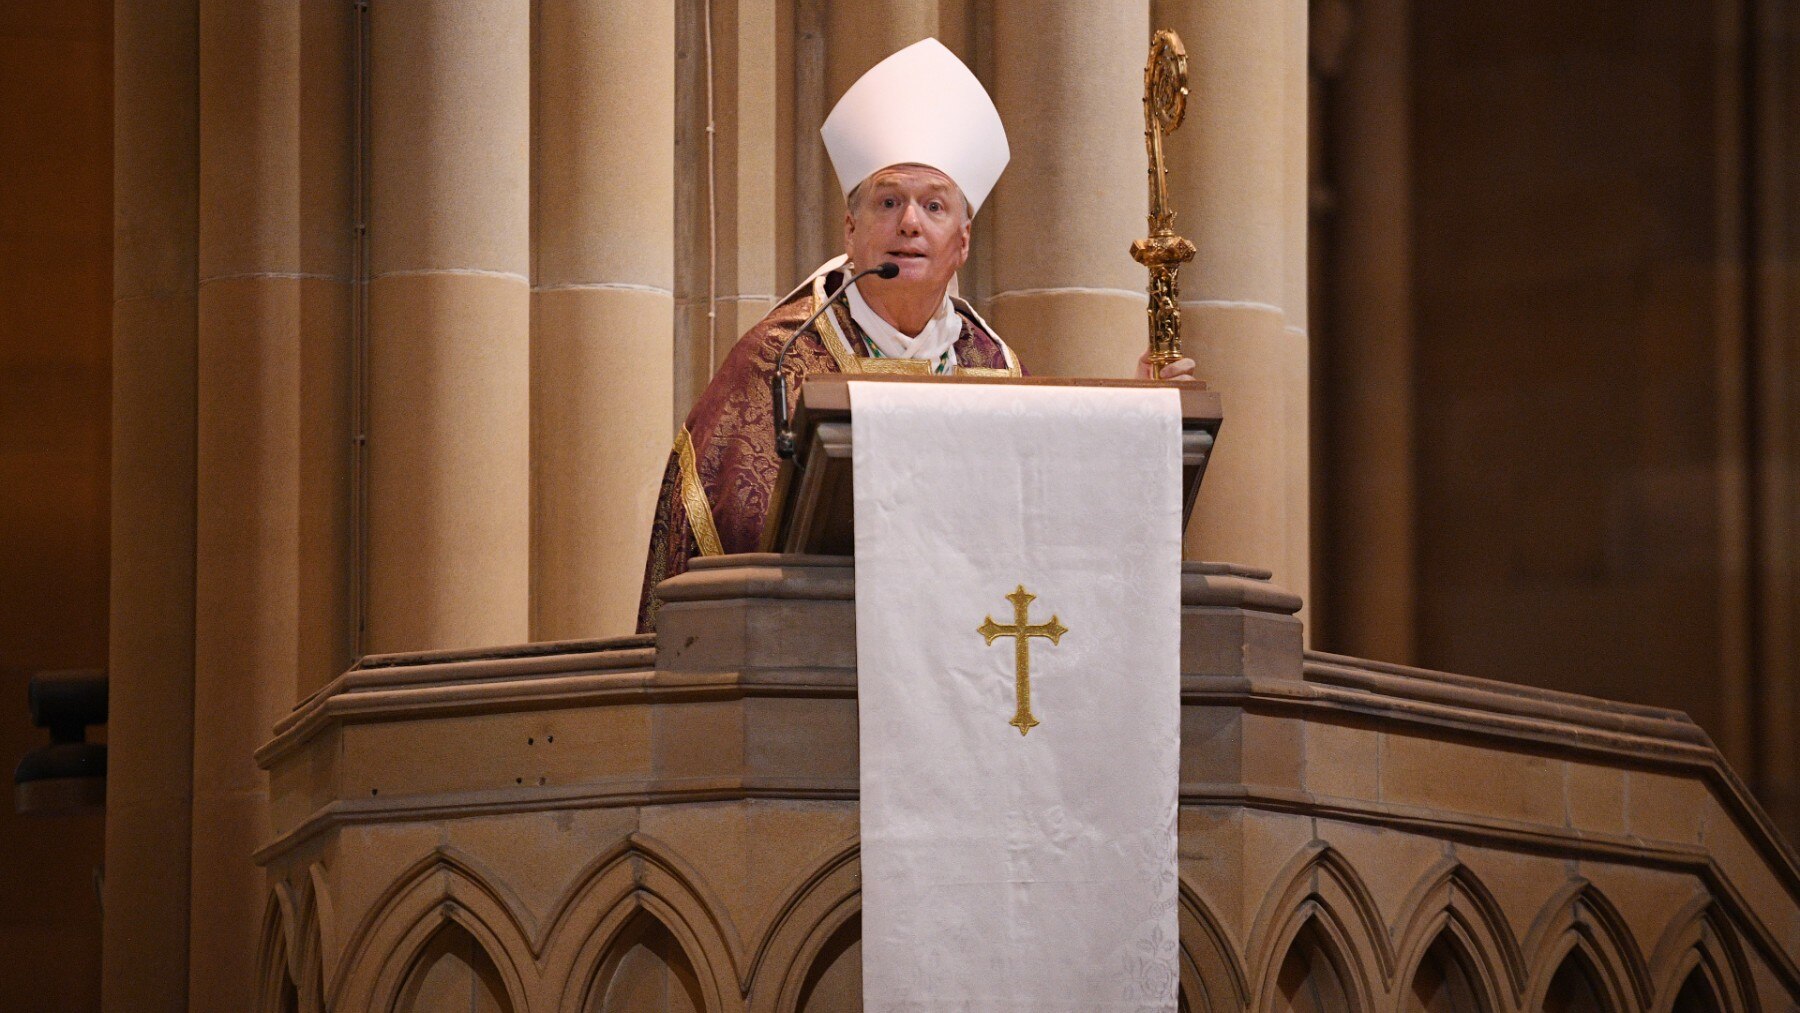 Archbishop of Sydney Anthony Fisher speaks during a State Funeral for Carla Zampatti at St Mary's Cathedral in Sydney, Thursday, April 15, 2021. 